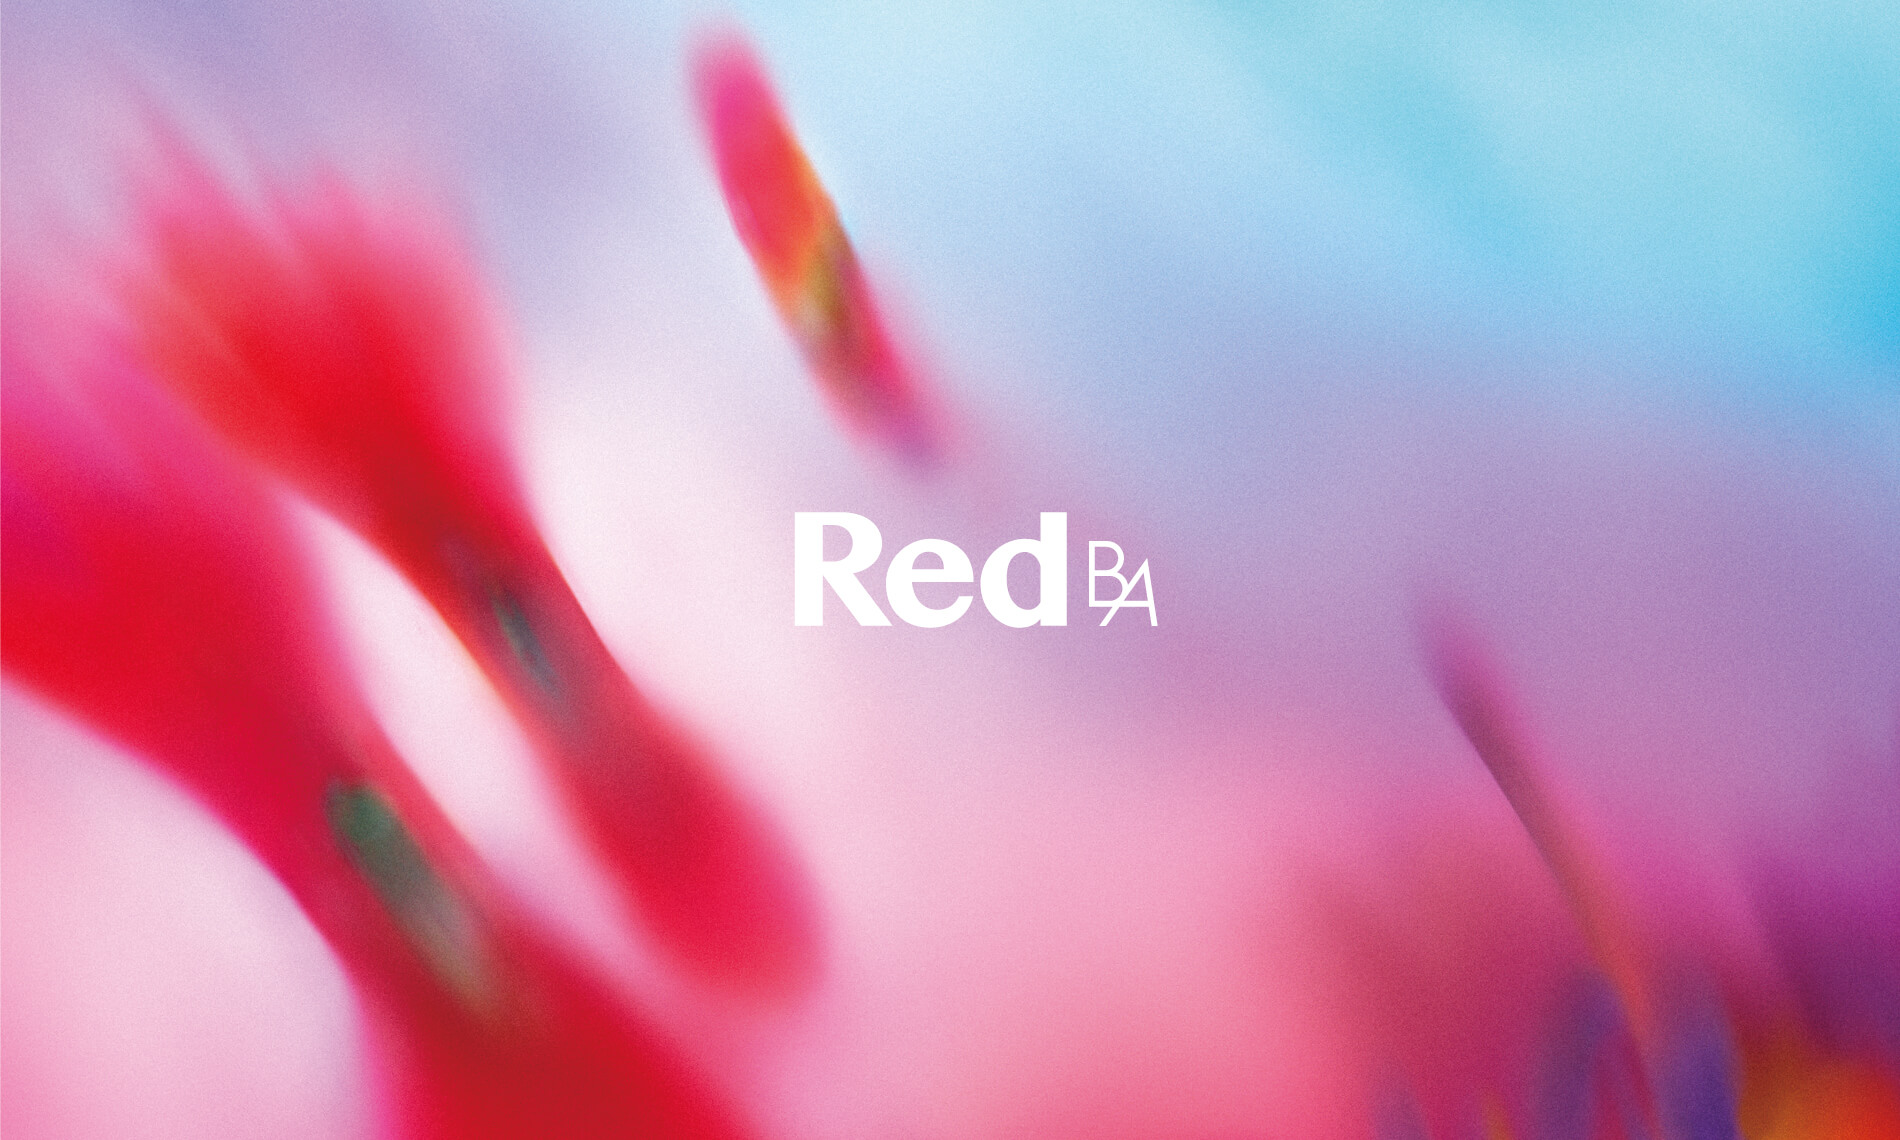 Red ポーラ公式 エイジングケアと美白・化粧品